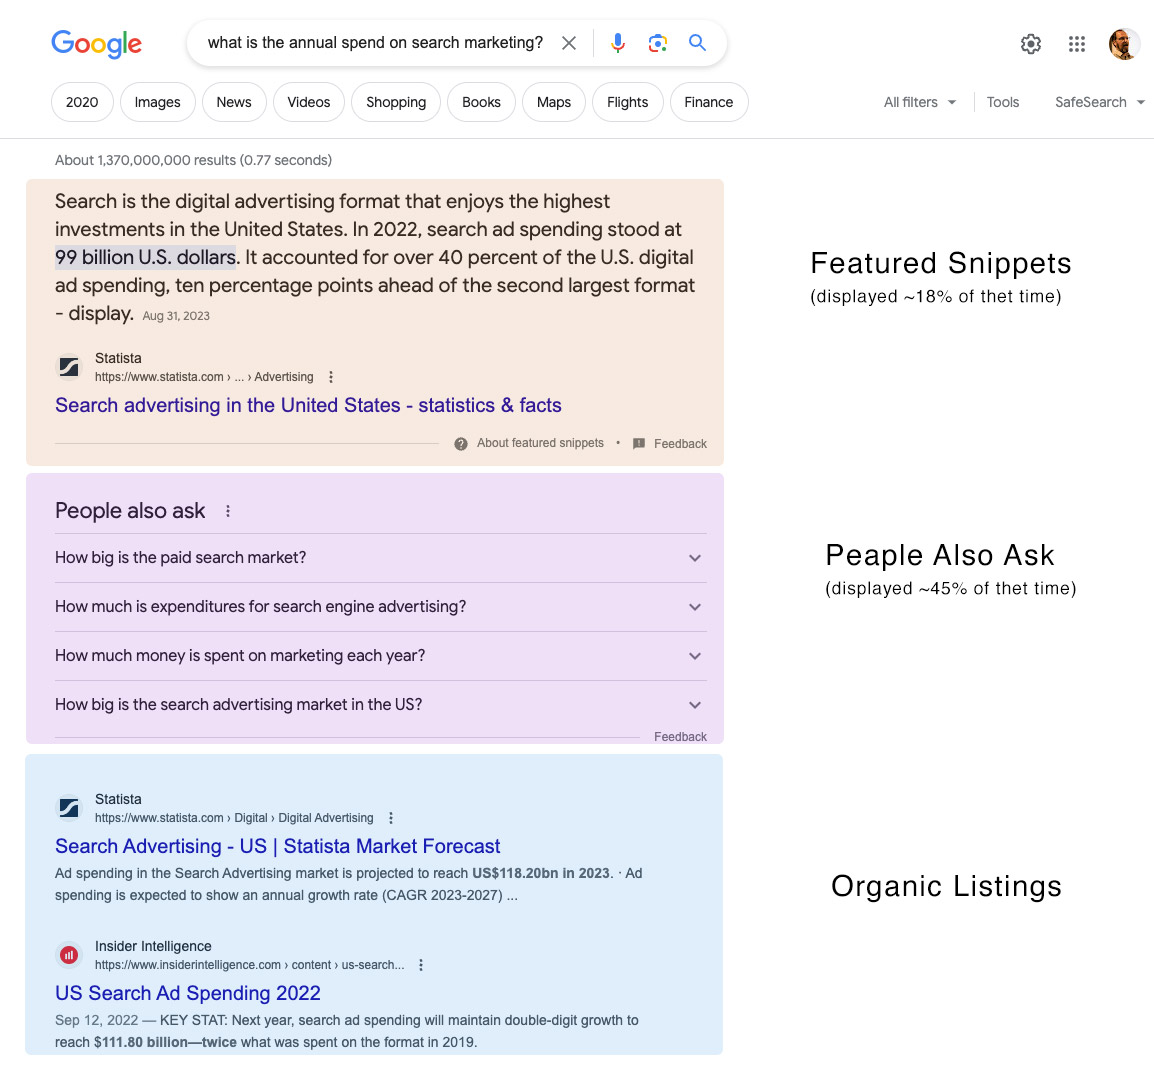 screenshot of Google SERP showing Featured Snippets and PAA